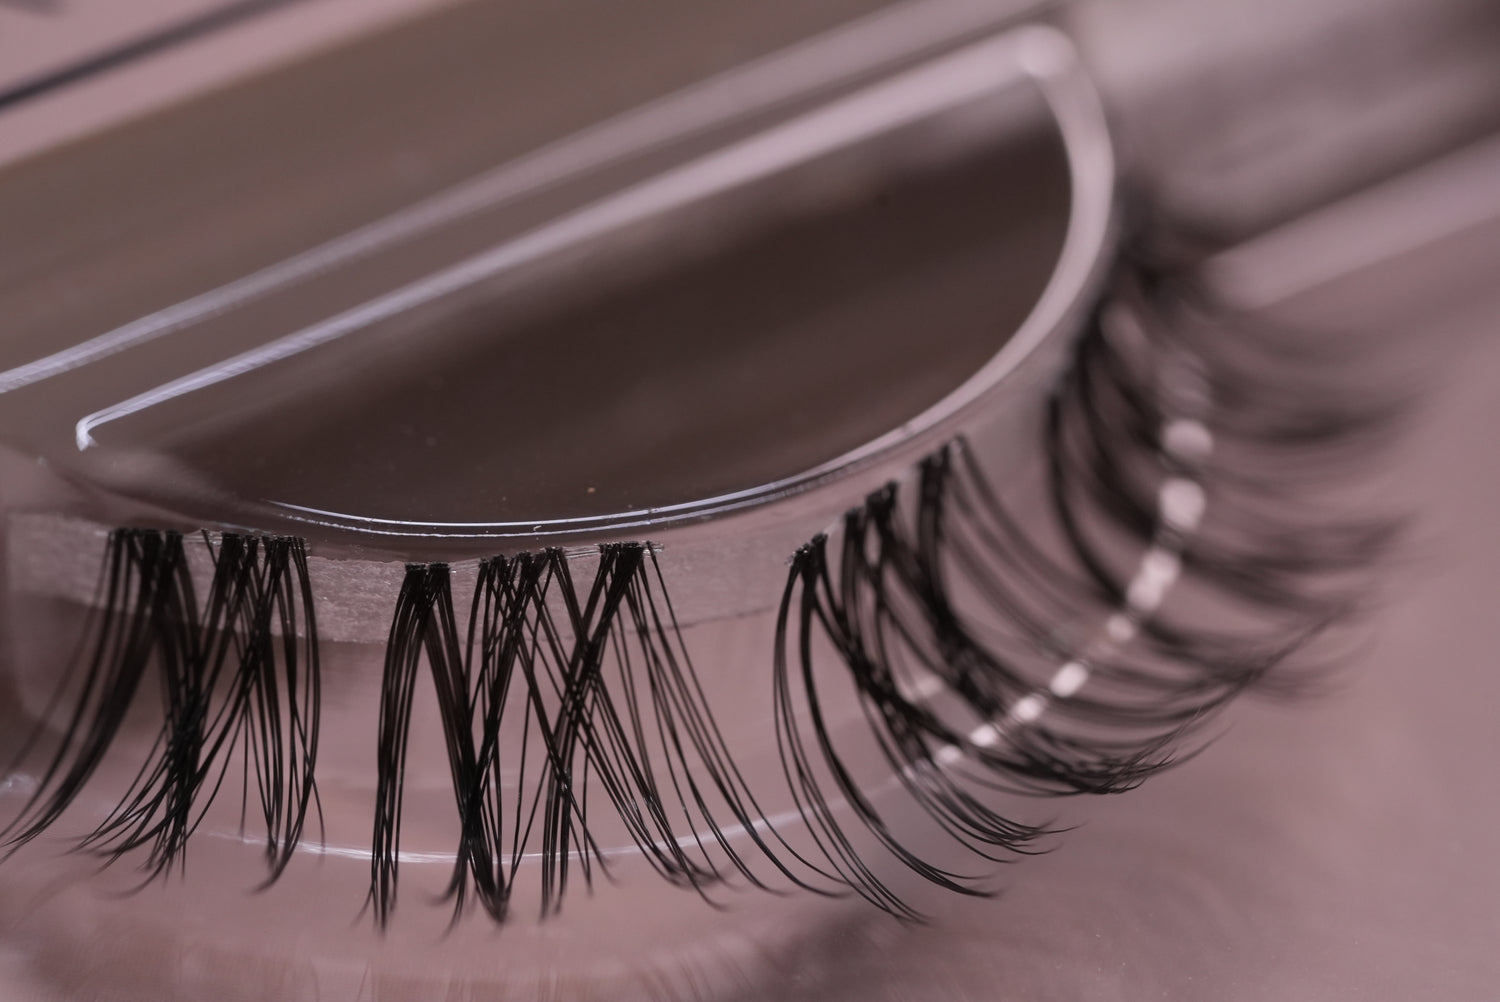 Effortless DIY At-Home Eyelash Extensions for Professional Results!